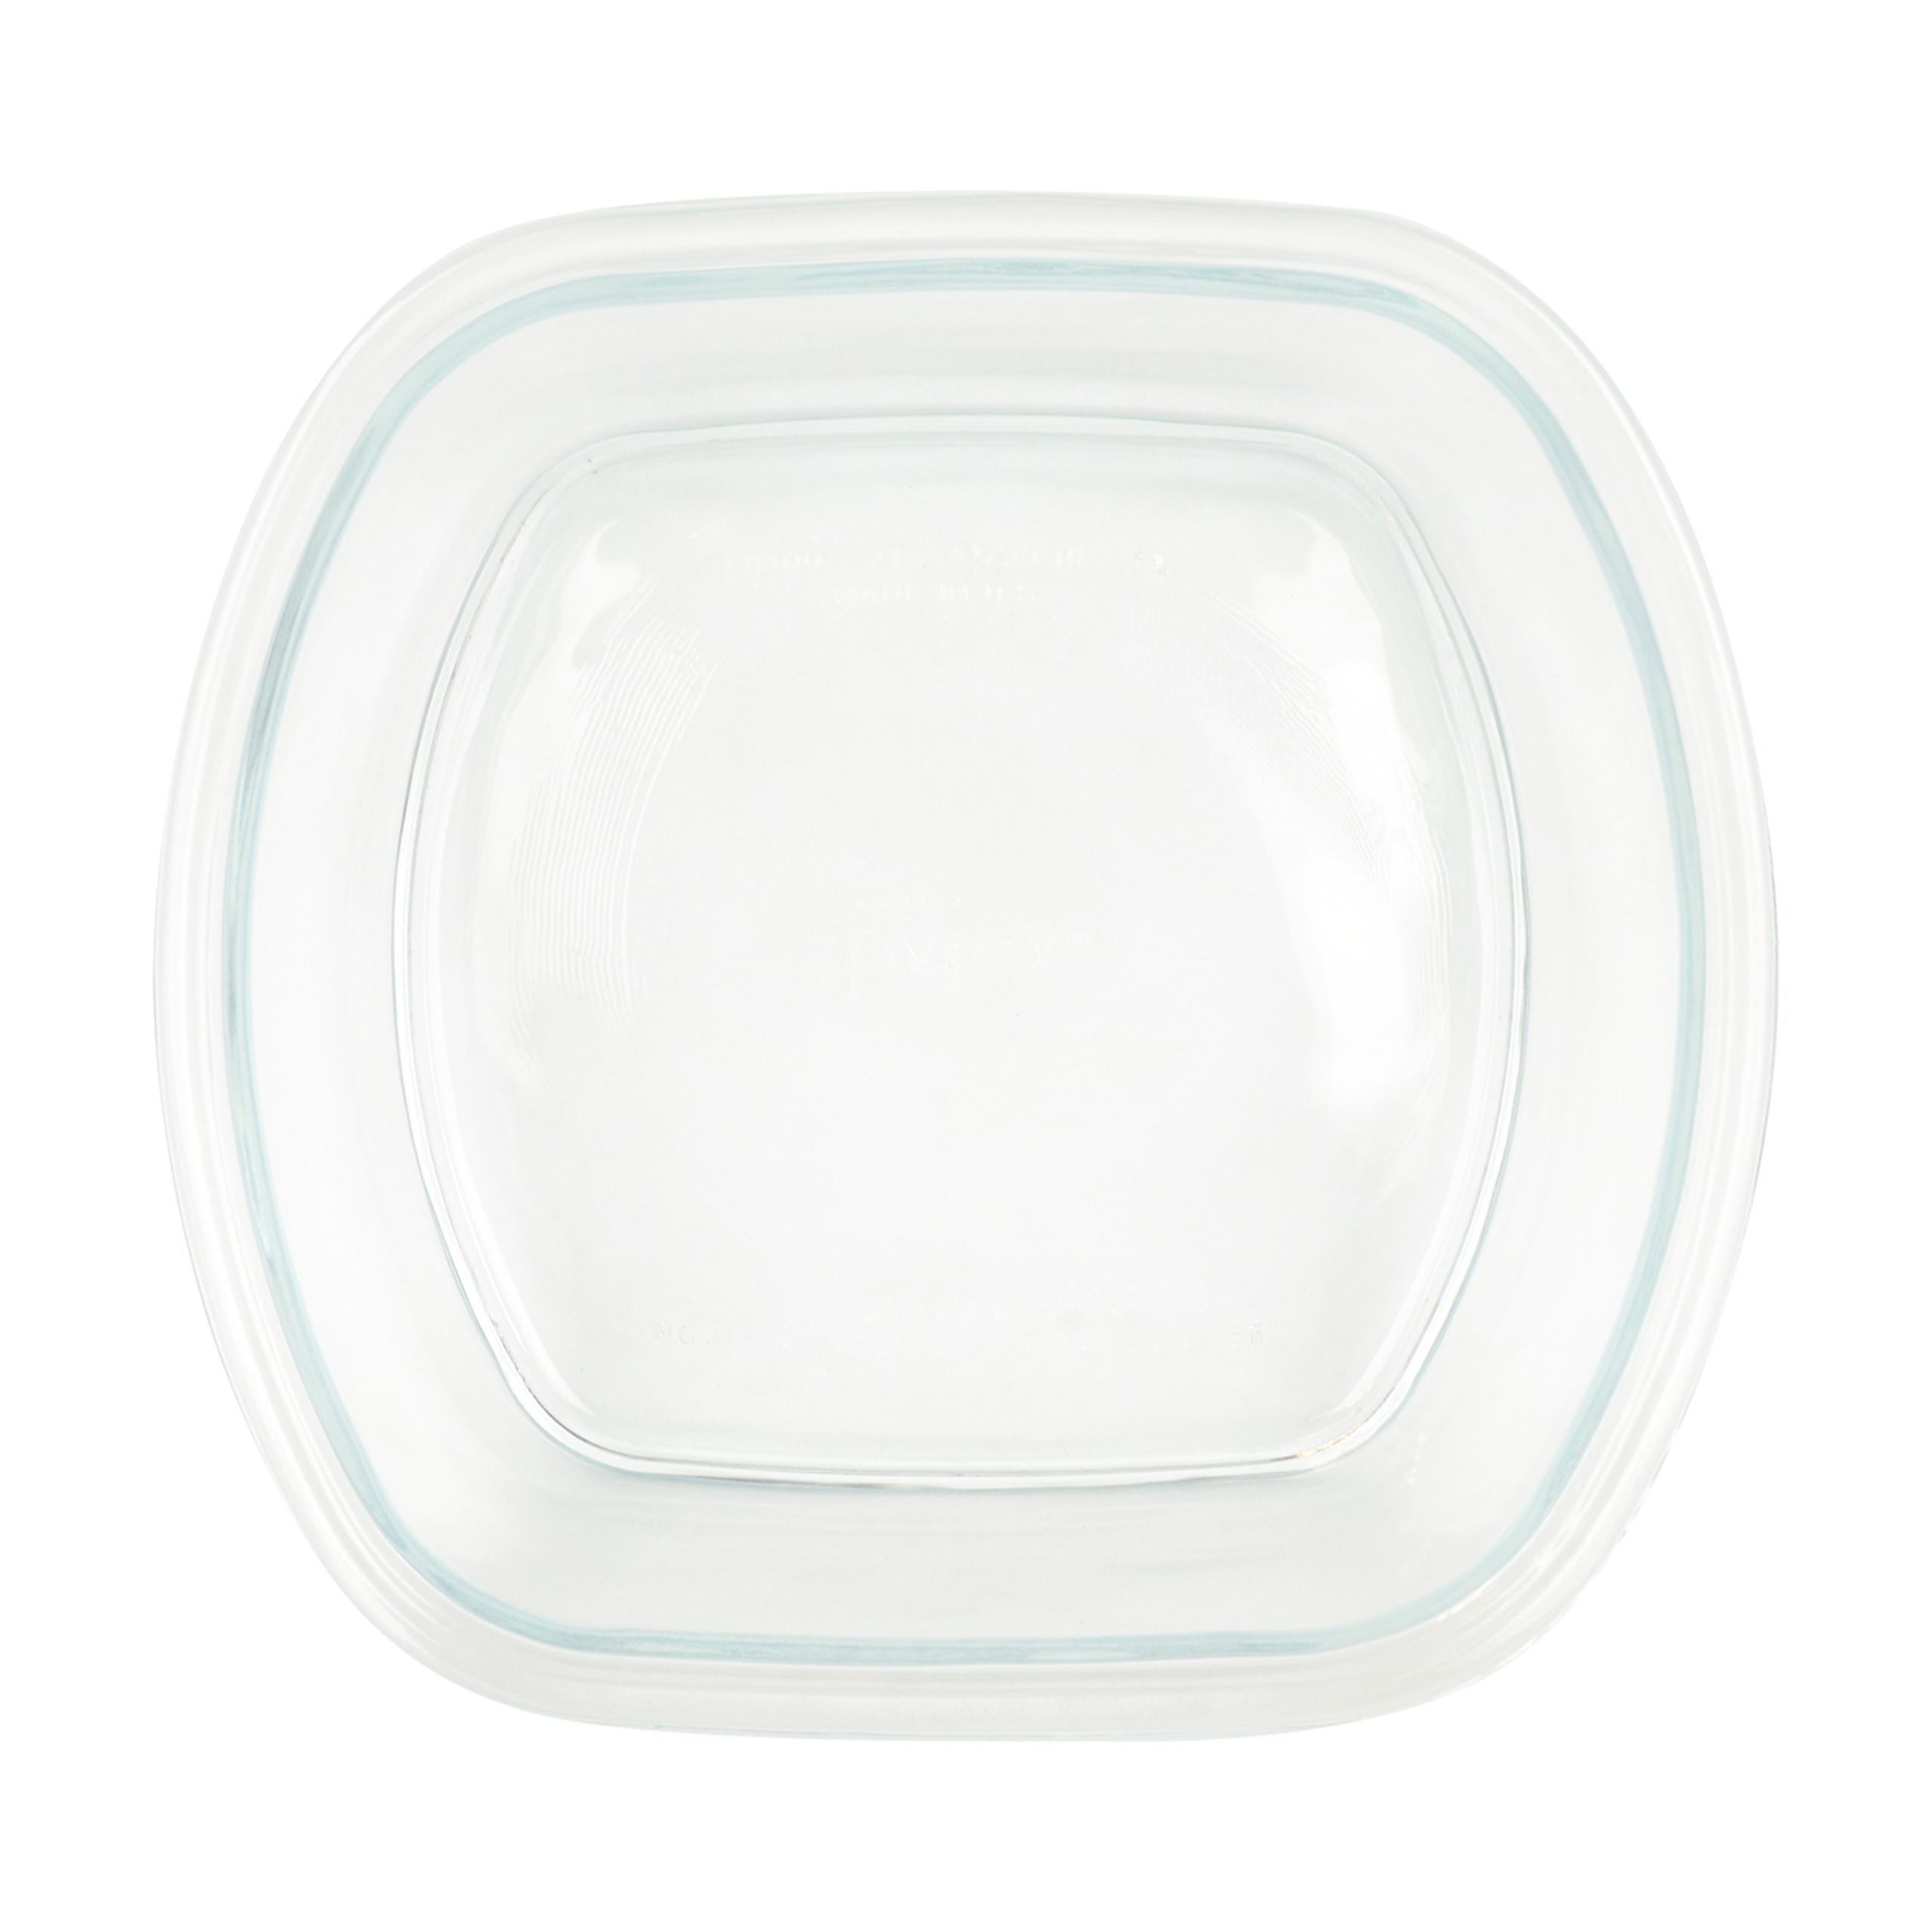 Pyrex 8100 4 5 Cup Glass Bowl Helton Tool And Home